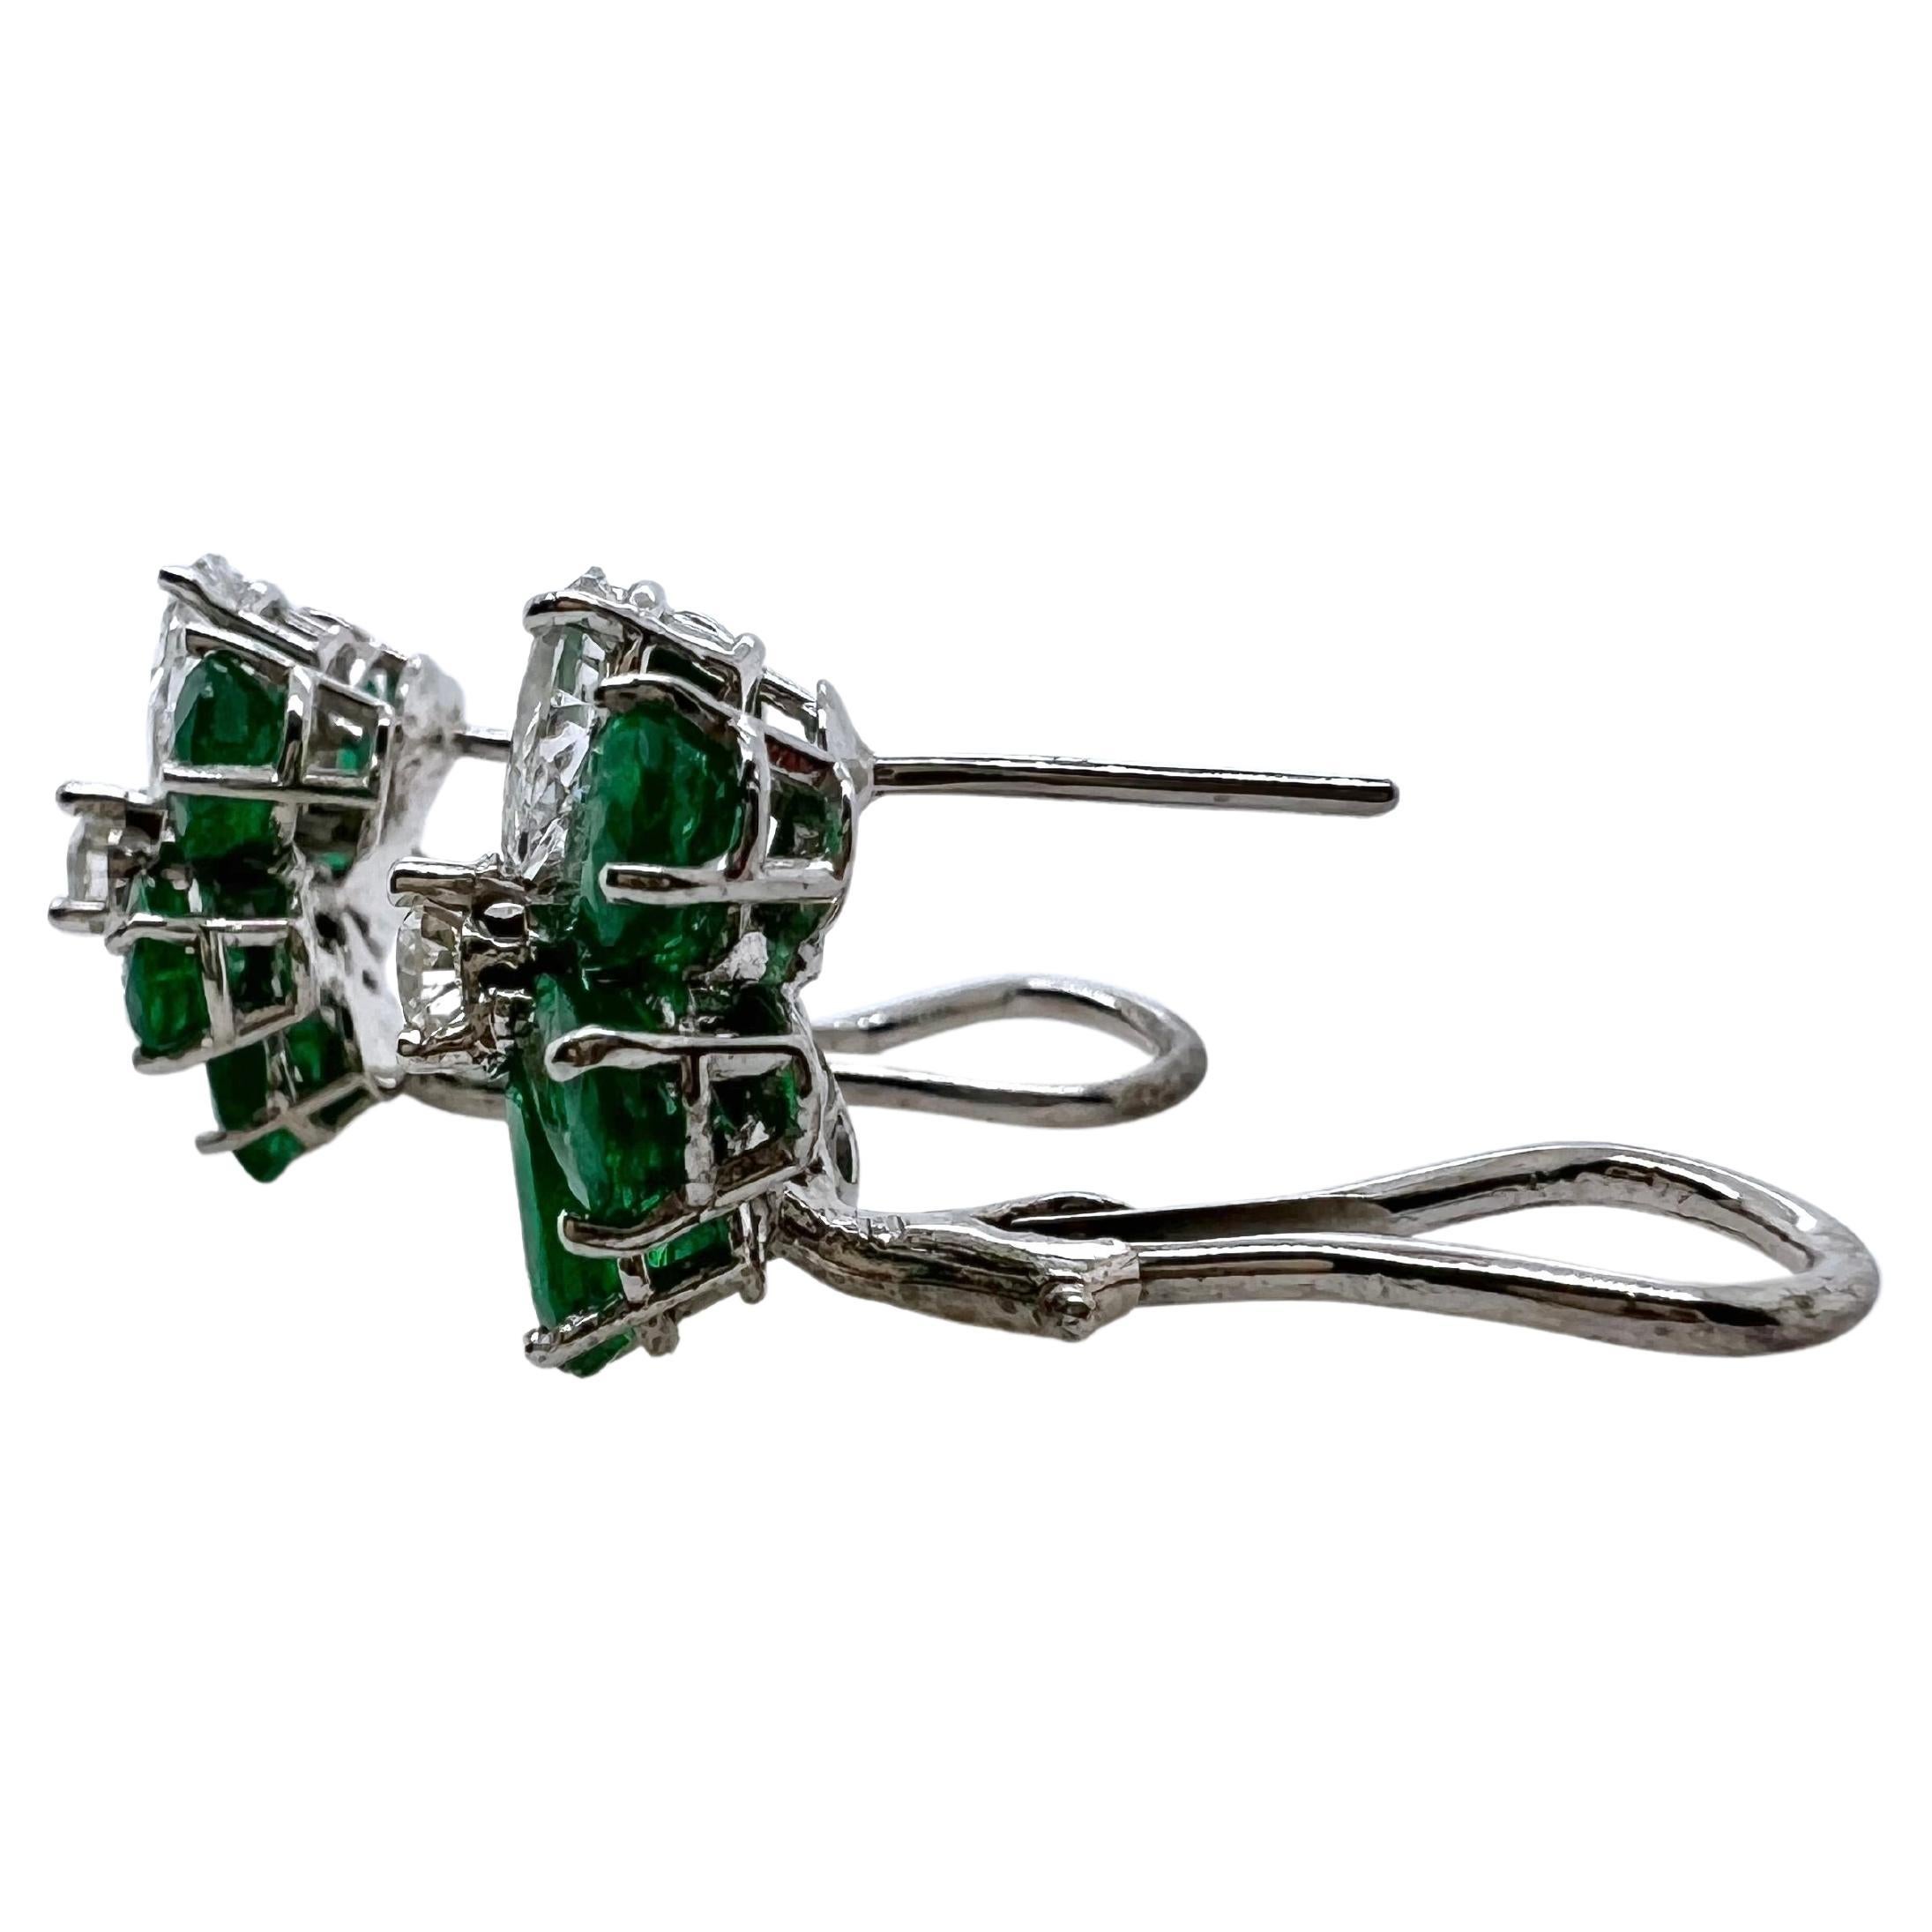 Contemporary 14k White Gold Pear Shaped Emeralds Earrings with Diamonds For Sale